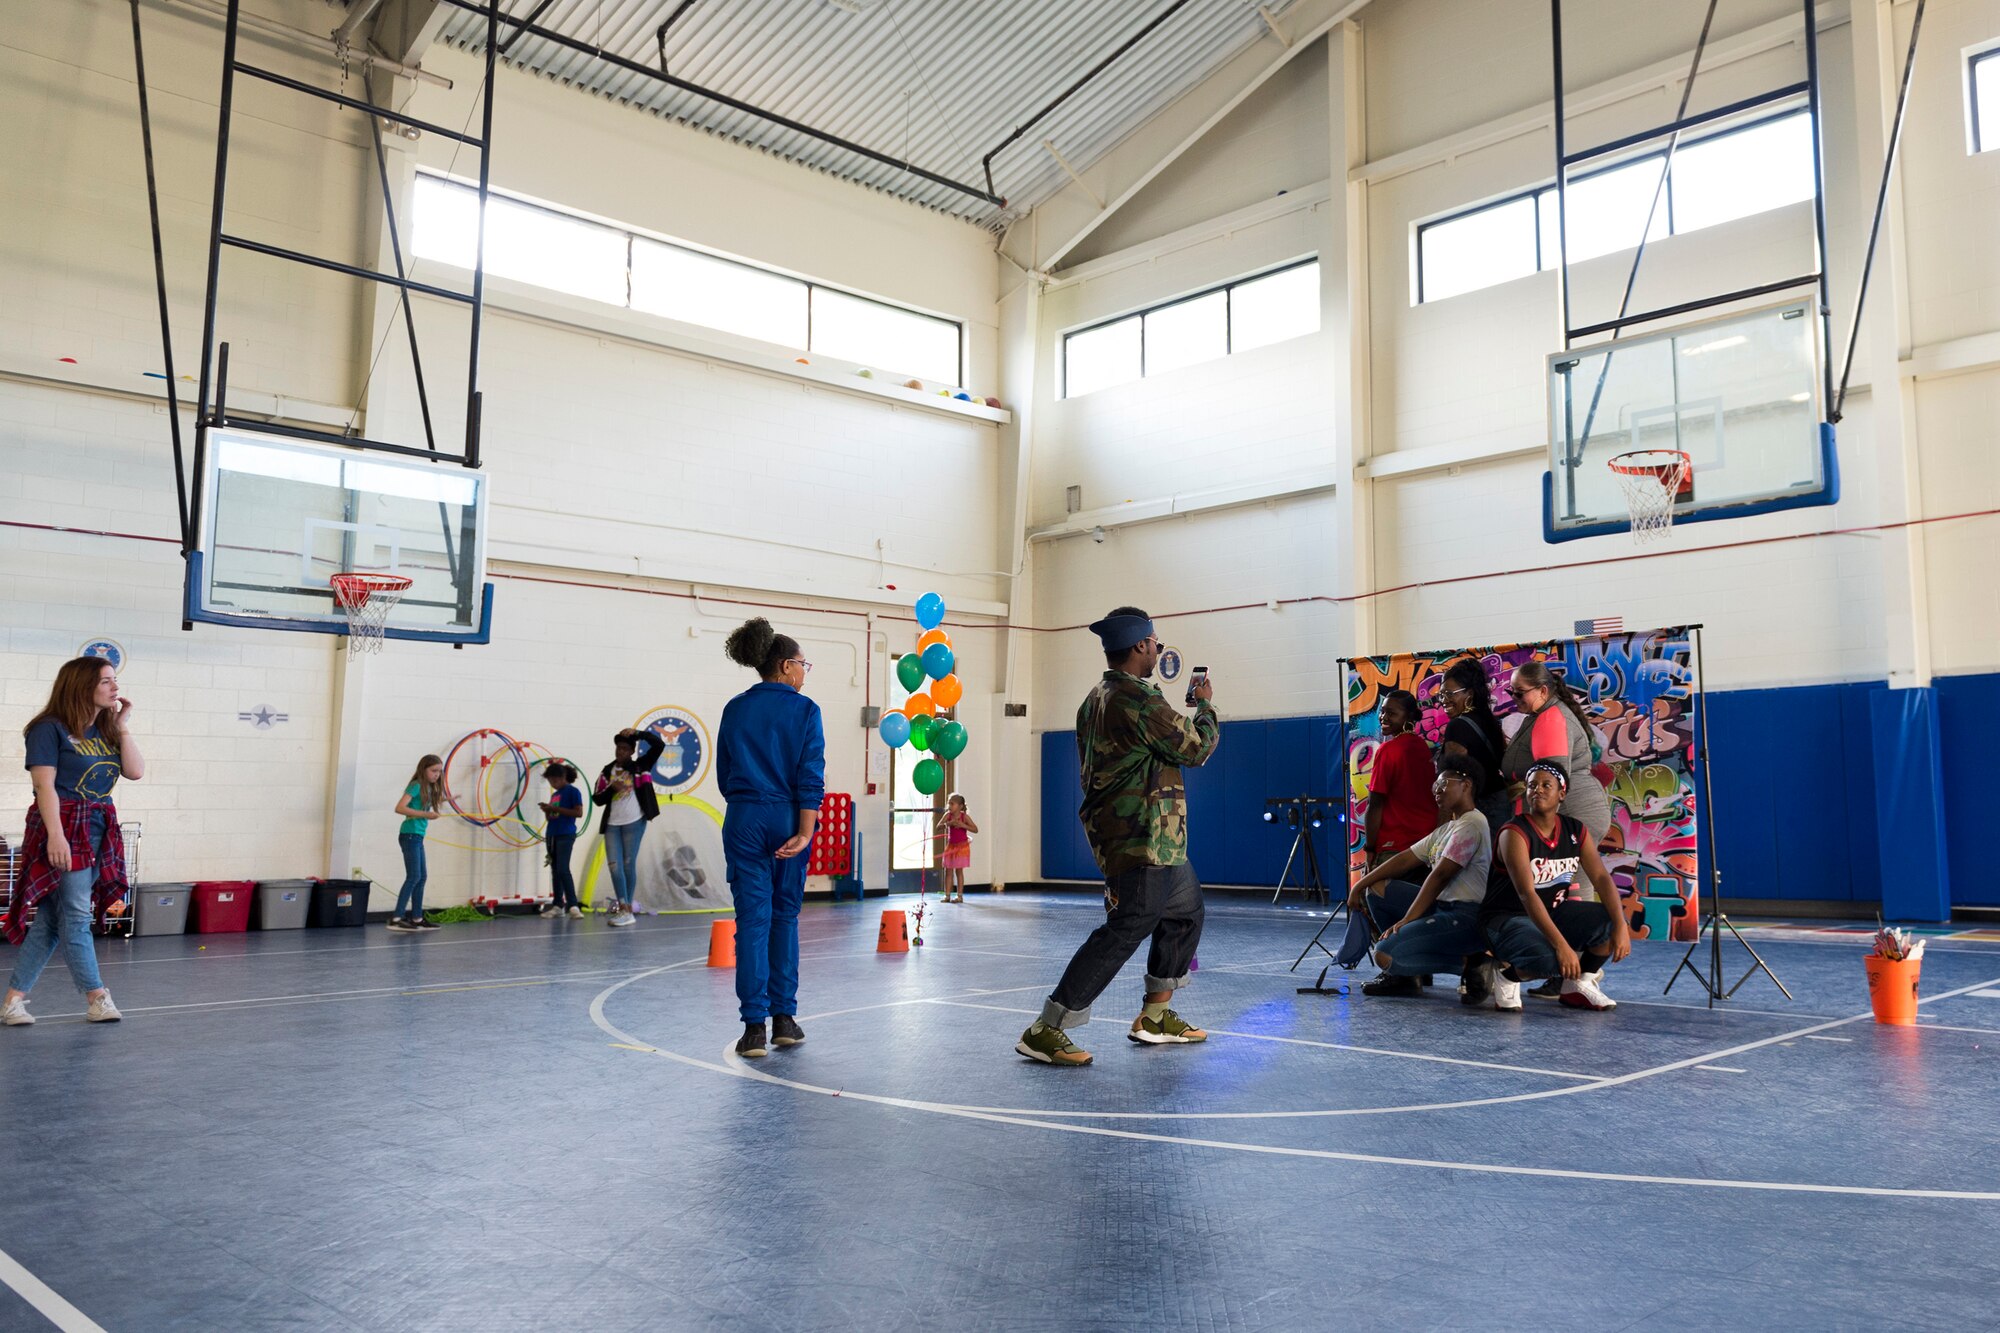 Participants pose for a photo during a youth dance party, April 12, 2019, at Moody Air Force Base, Ga. Team Moody showed its support for military children by hosting a number of events during Month of the Military Child in April. (U.S. Air Force photo by Airman 1st Class Hayden Legg)